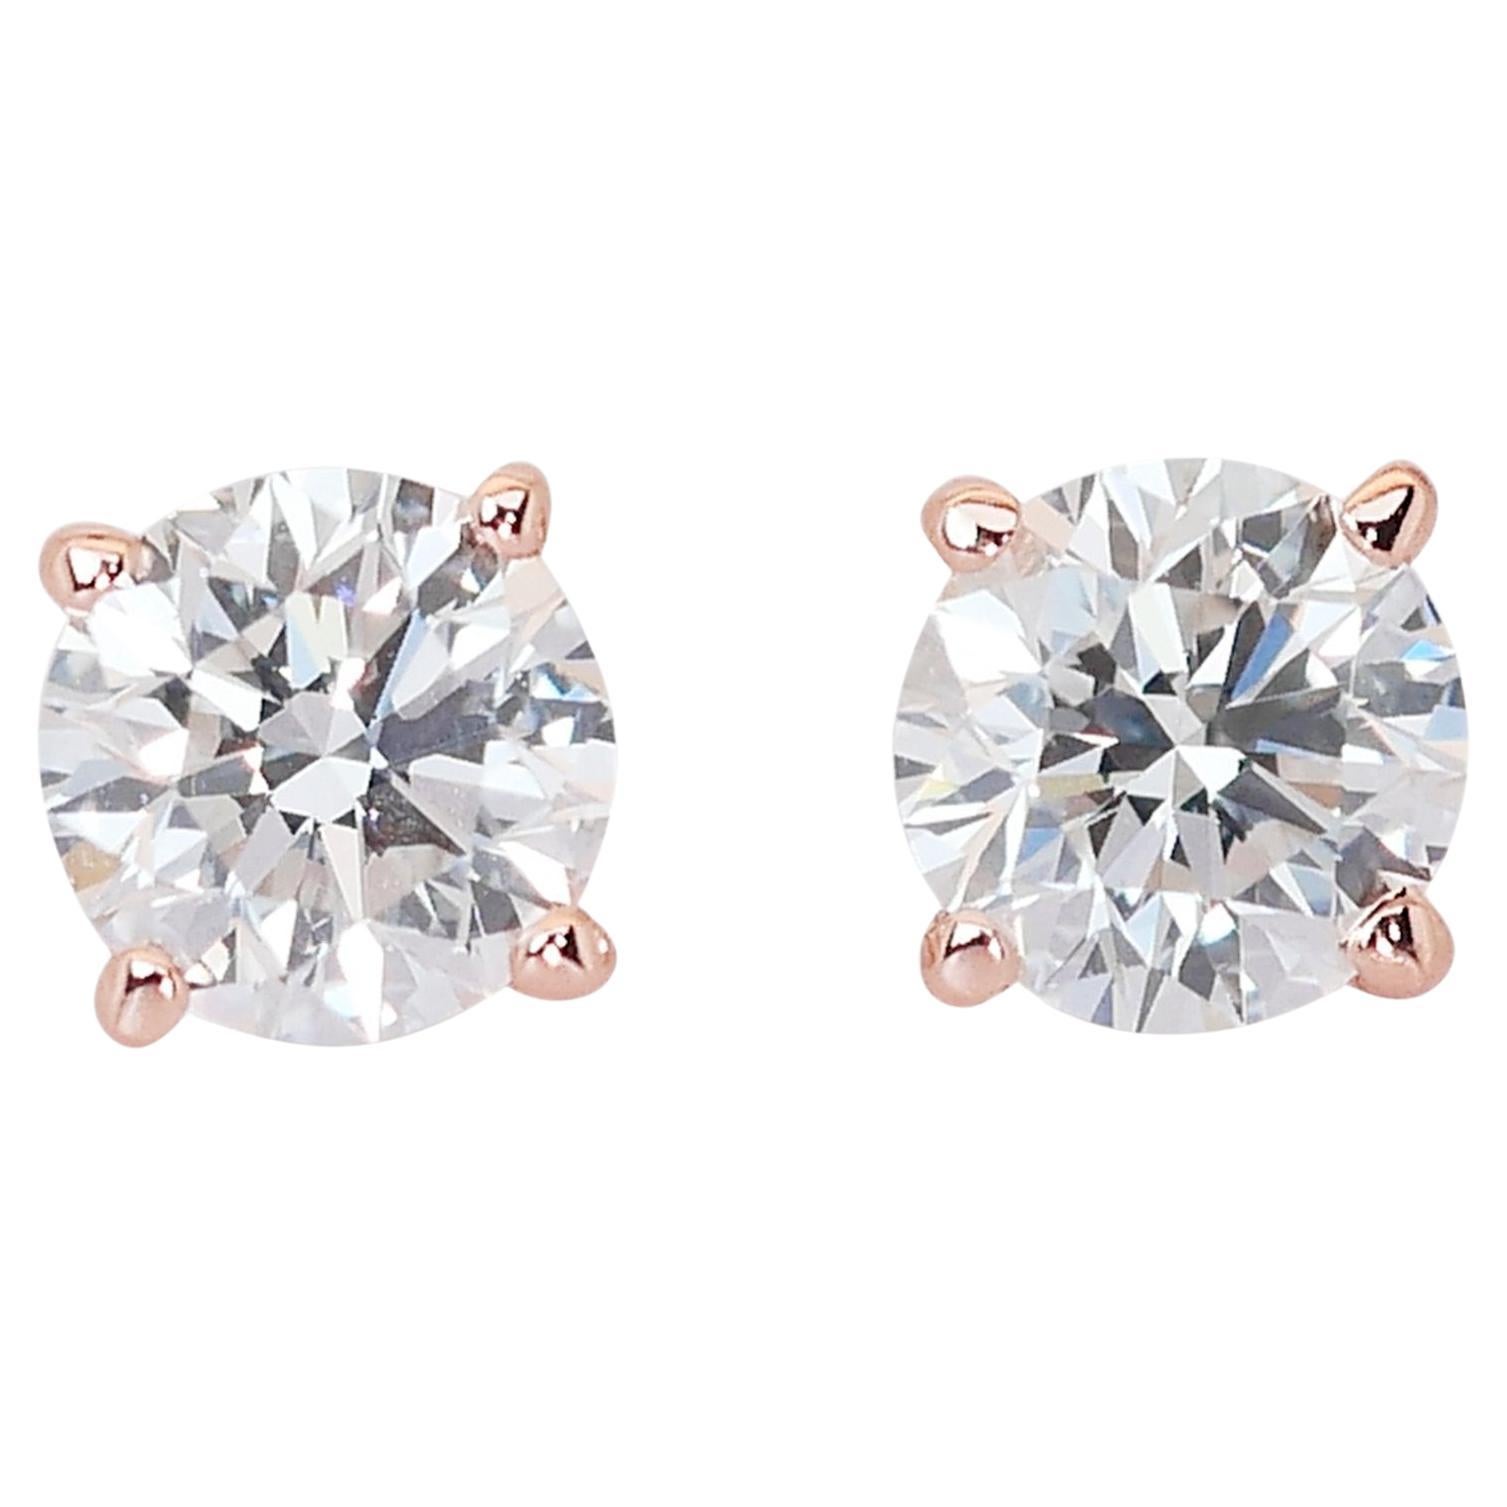 Magical 18K Rose Gold Diamond Stud Earrings with 1.80ct - GIA Certified For Sale